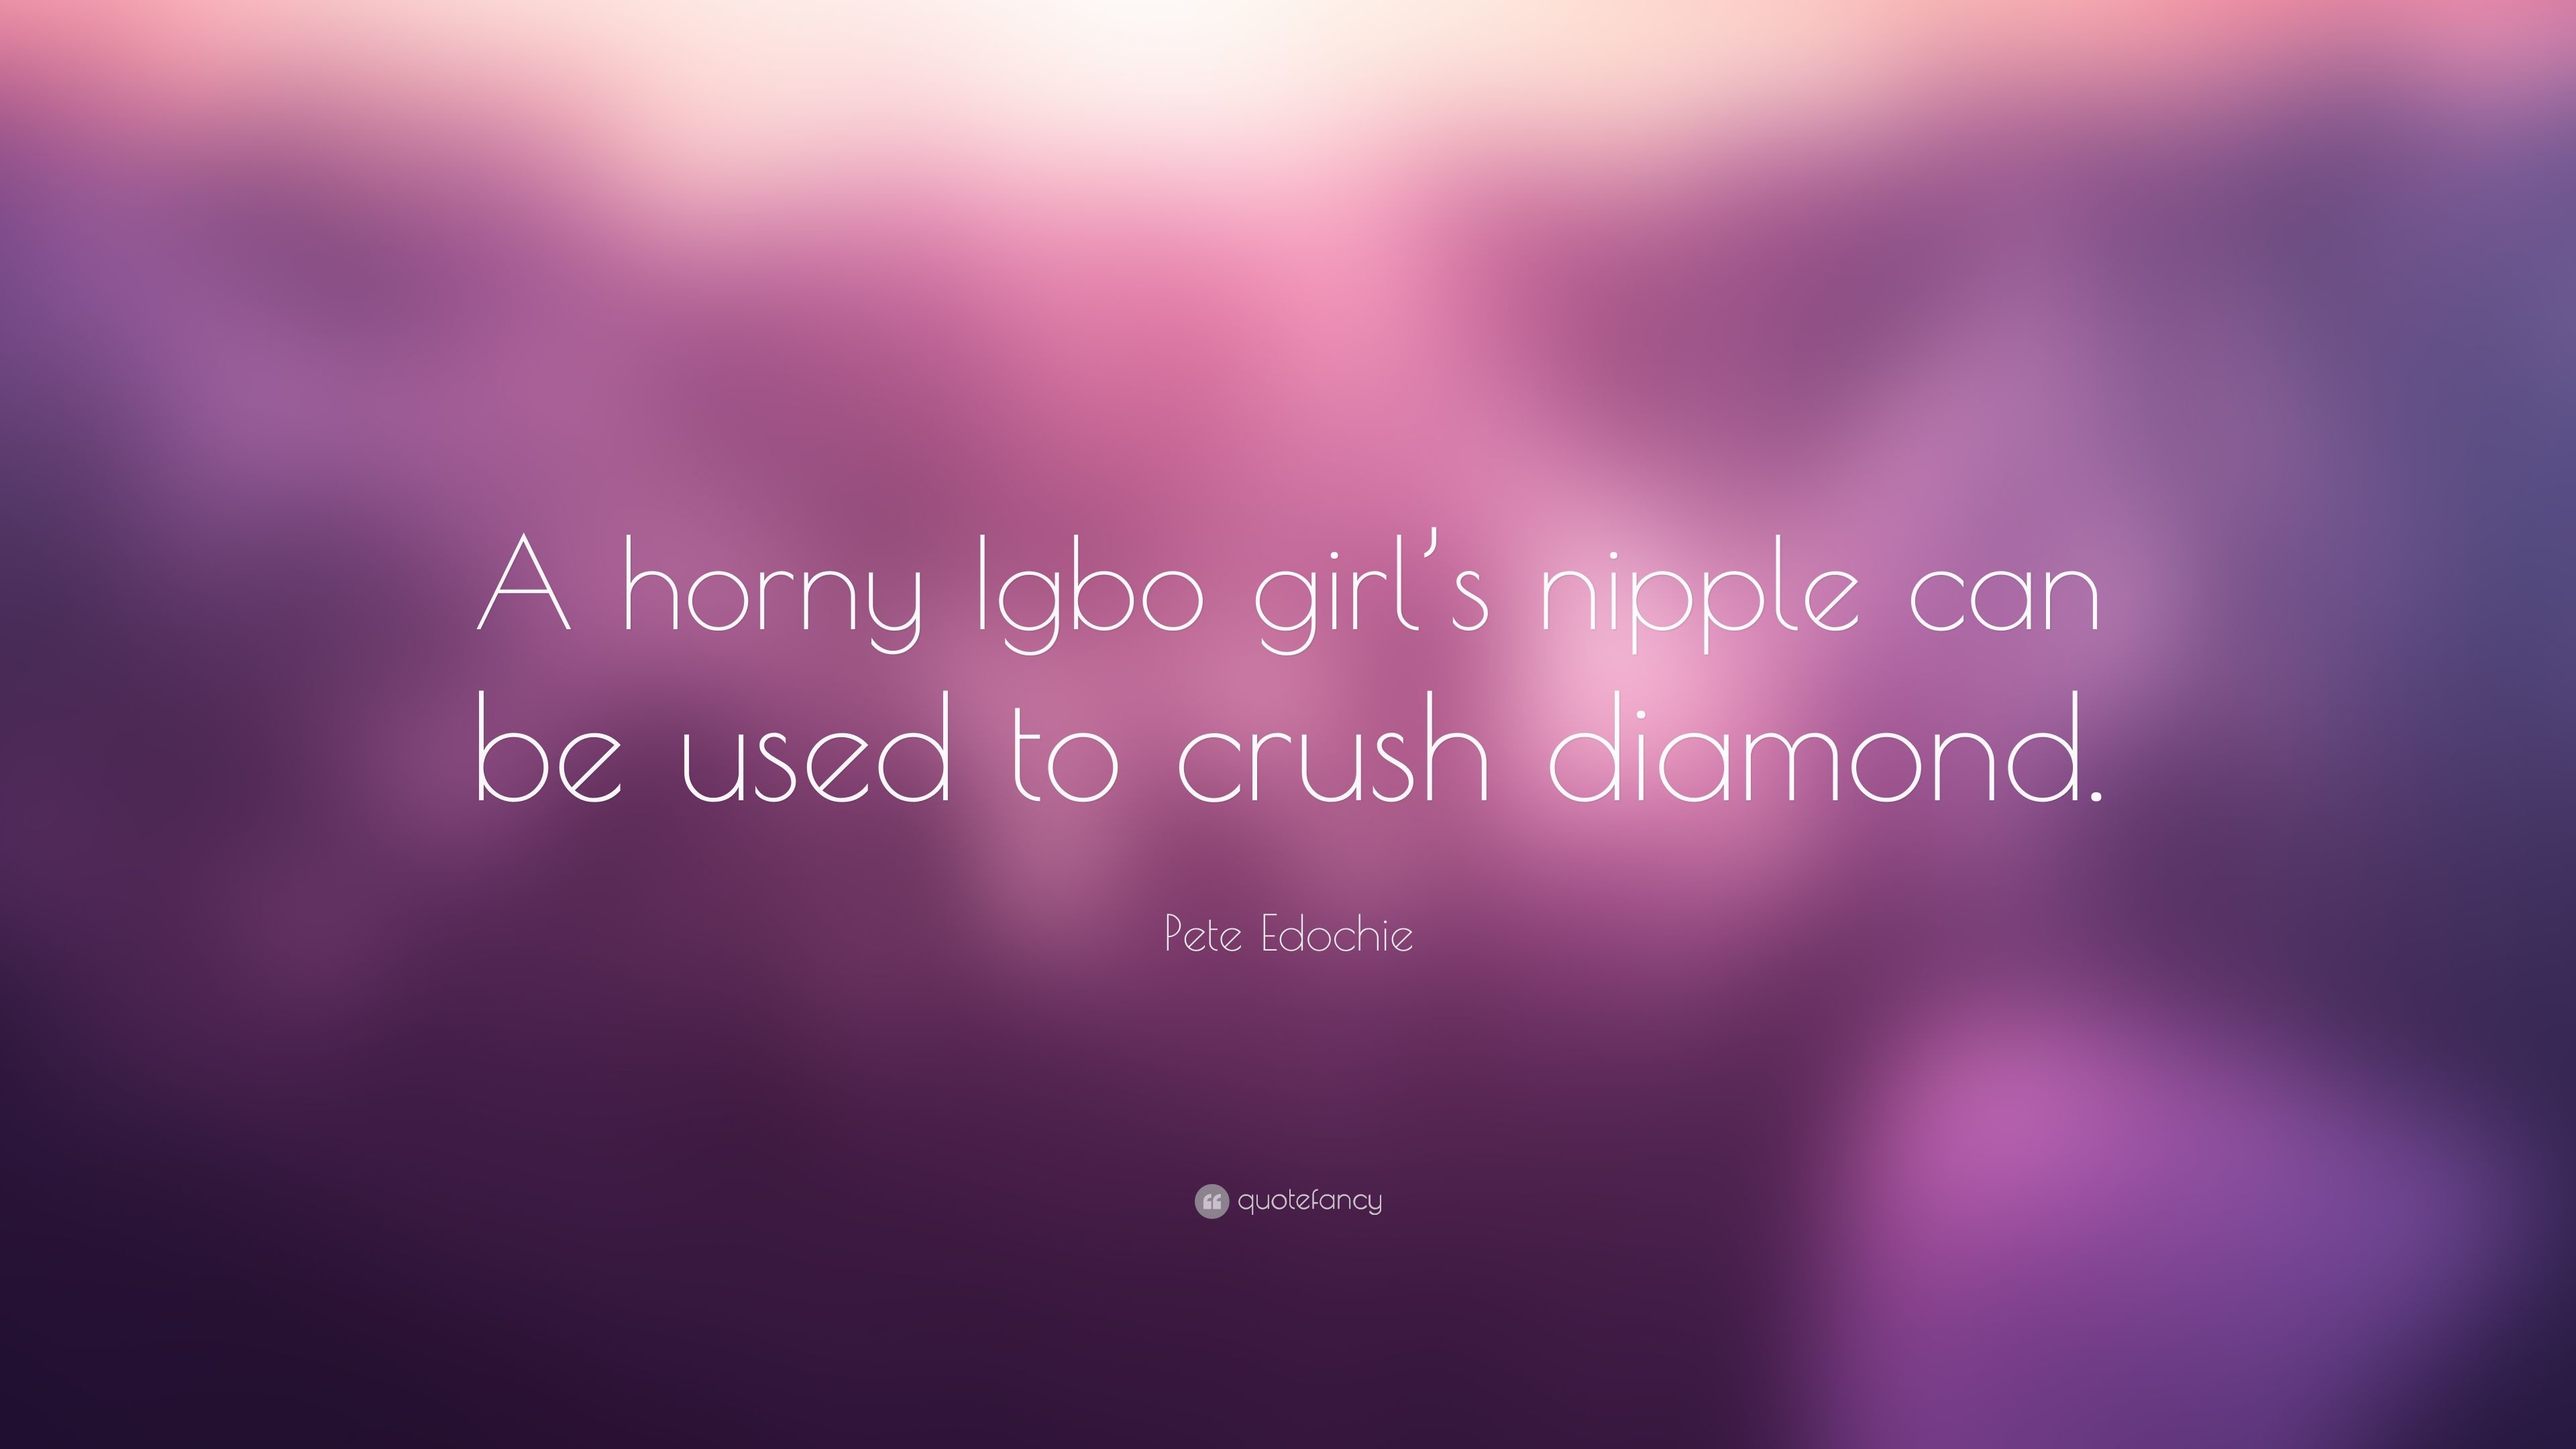 3840x2160 Pete Edochie Quote: “A horny Igbo girl's nipple can be used to crush diamond